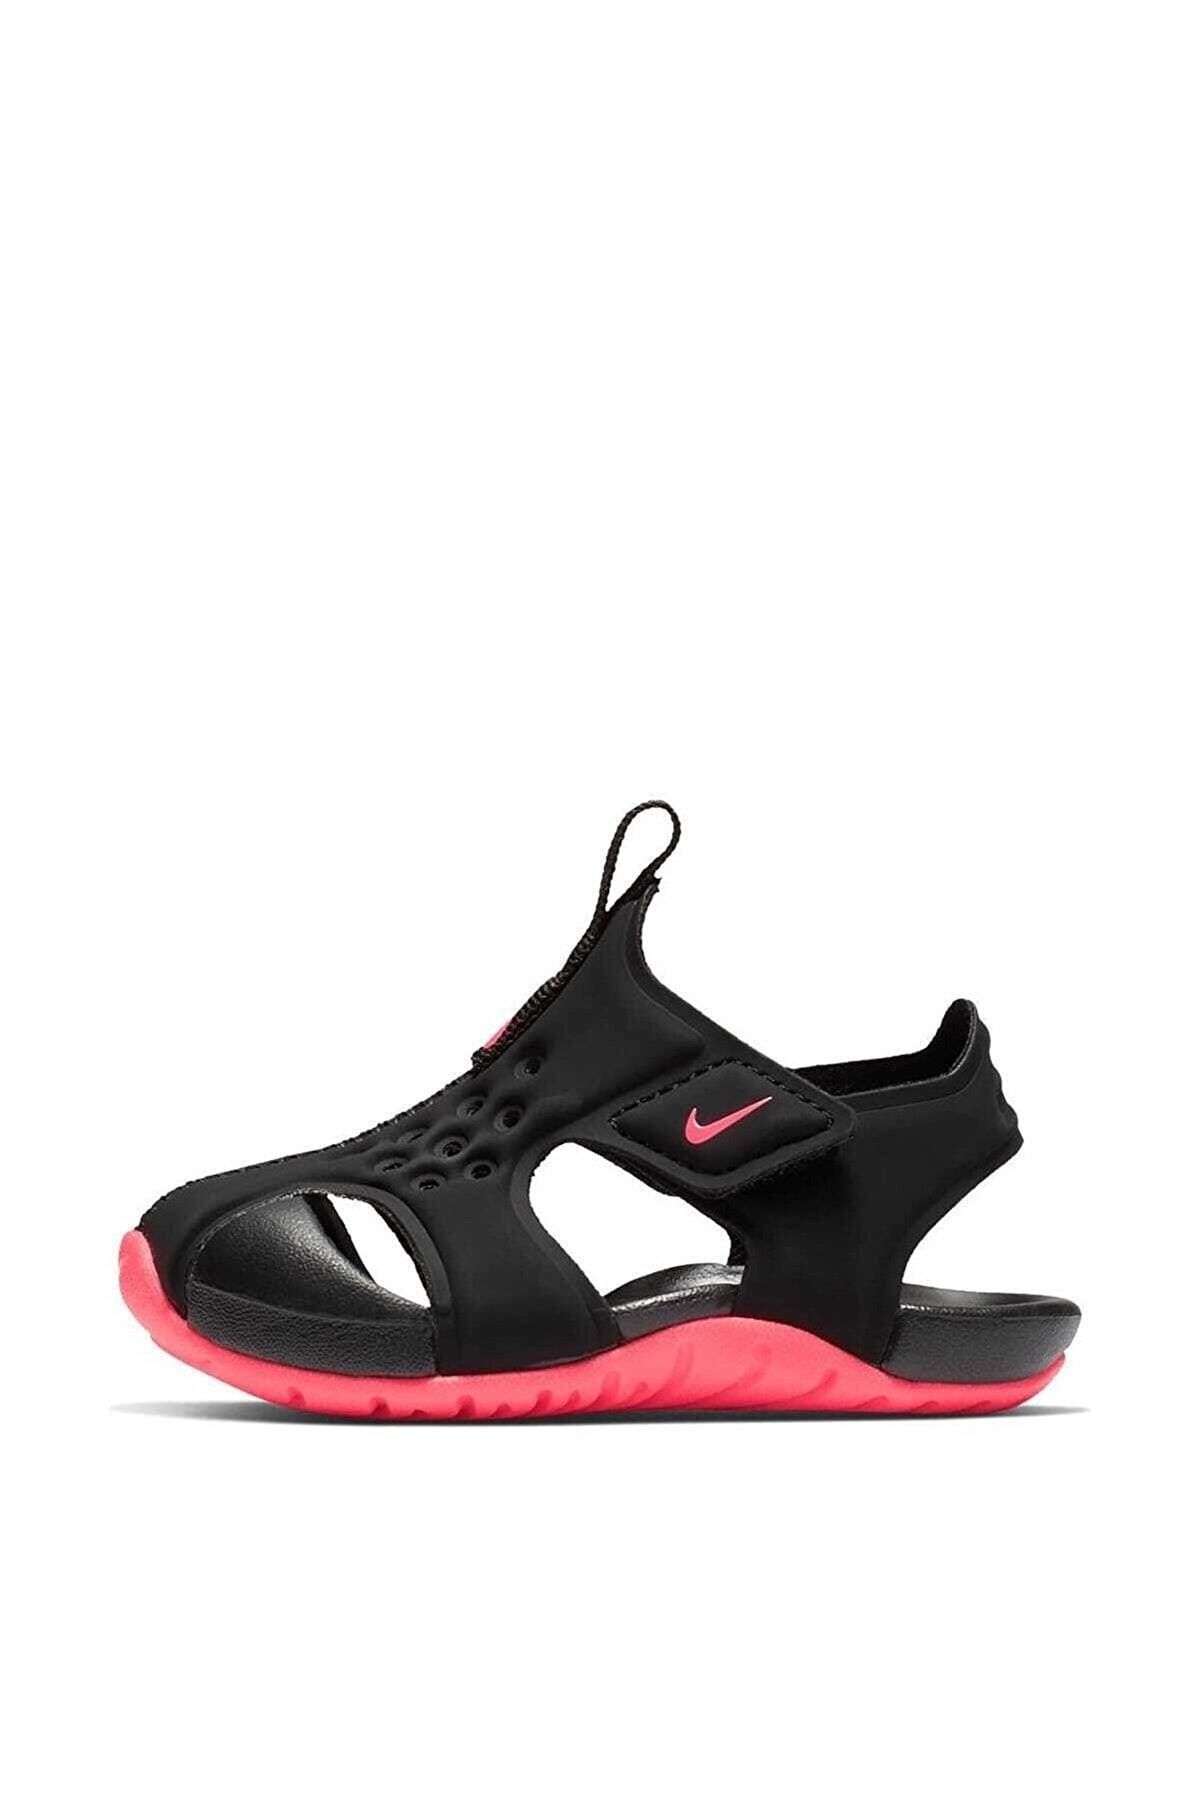 Nike Sunray Protect 2 Sandals Black Baby 943827-003